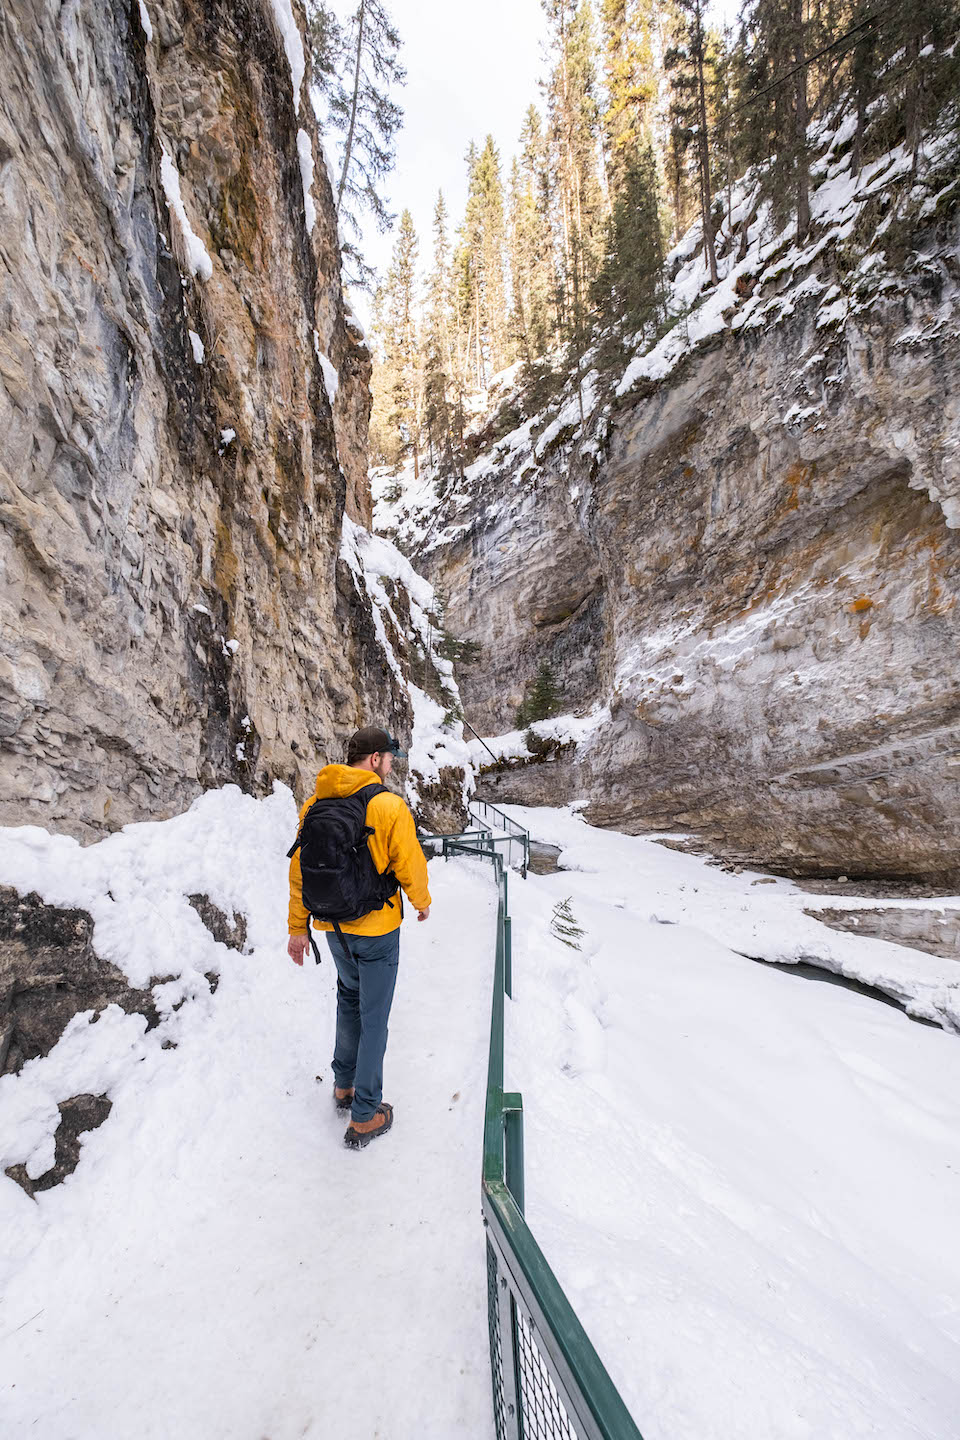 johnston canyon in winter